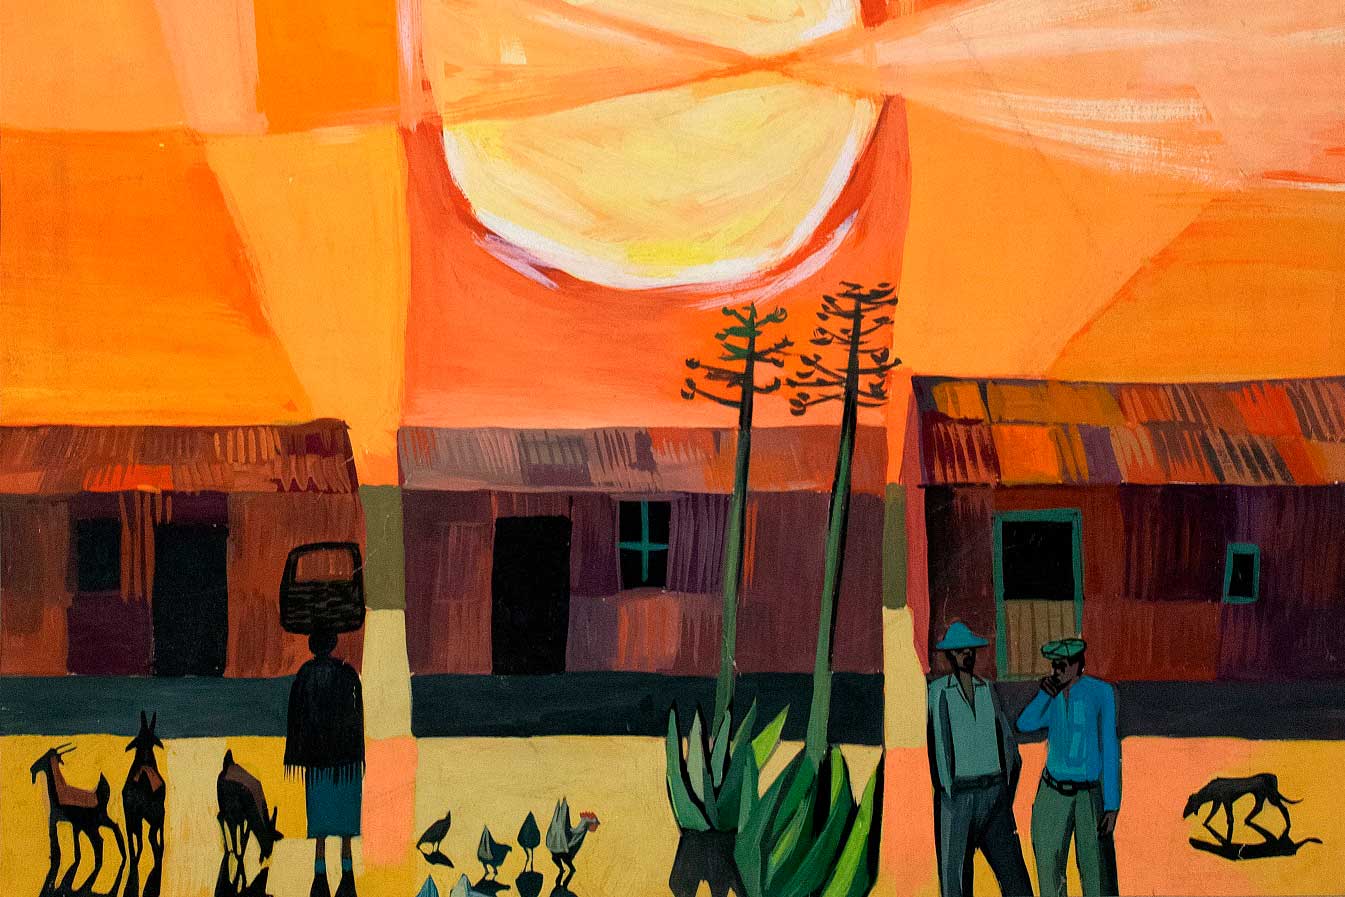 Peter Clarke (South African, 1929–2014), That Evening Sun Goes Down (detail), 1960, gouache on paper, 21 1/2 x 17 in. Fisk University Galleries, Nashville, Gift of the Harmon  Foundation, 1991.313. © 2022 Peter Edward Clarke / DALRO, Johannesburg / Artists Rights Society (ARS), New York. Courtesy American Federation of Arts. Funding for the conservation of  this artwork was generously provided through a grant from the Bank of America Conservation Project